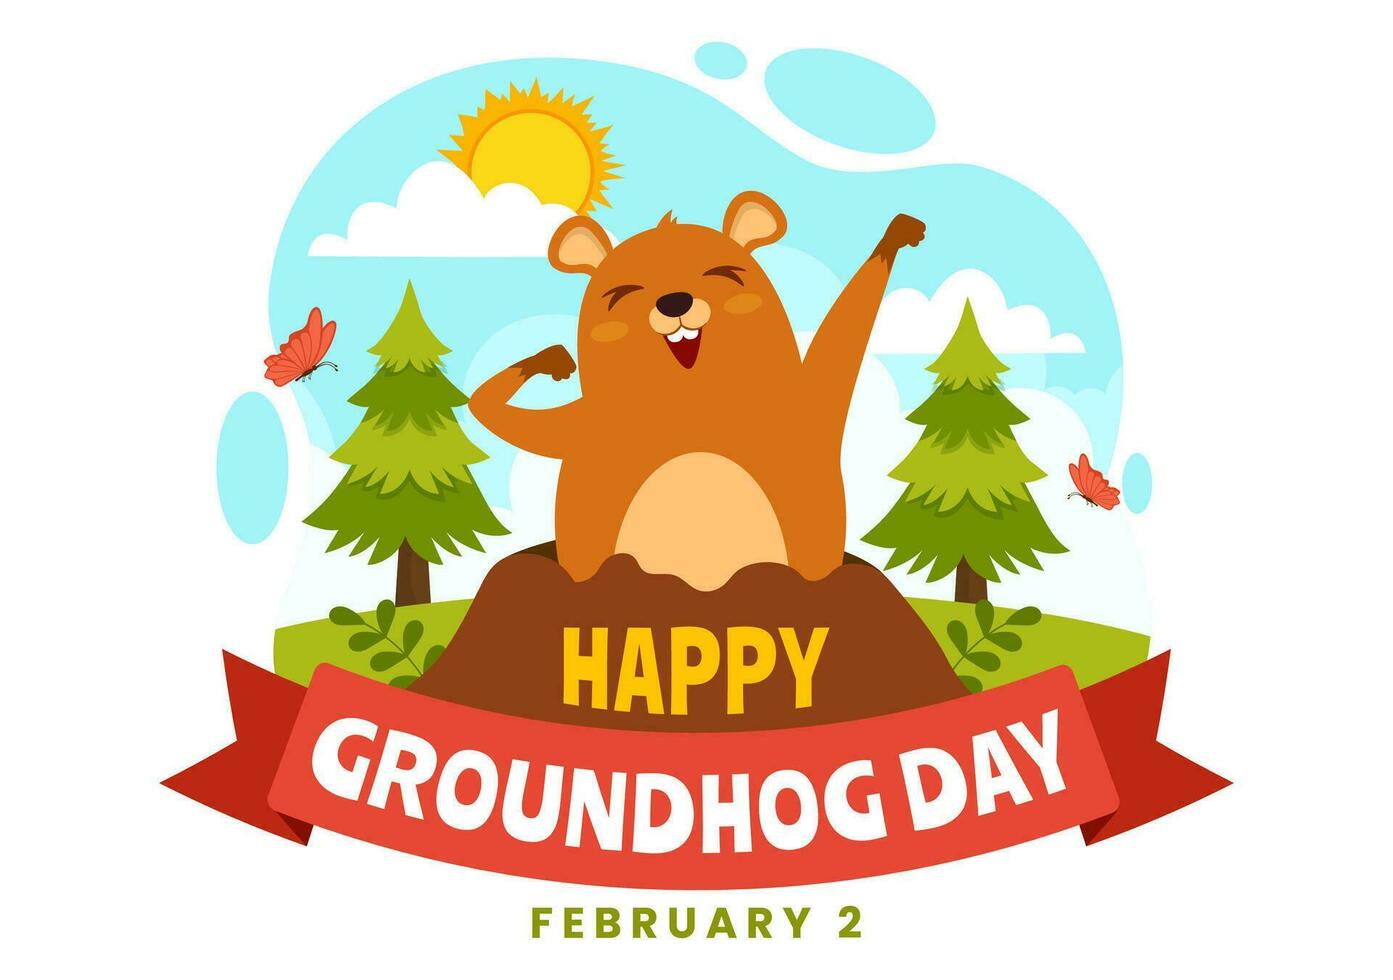 Happy Groundhog Day Vector Illustration on February 2 with a Groundhog Animal Emerged from the Hole Land and Garden in Background Cartoon Design